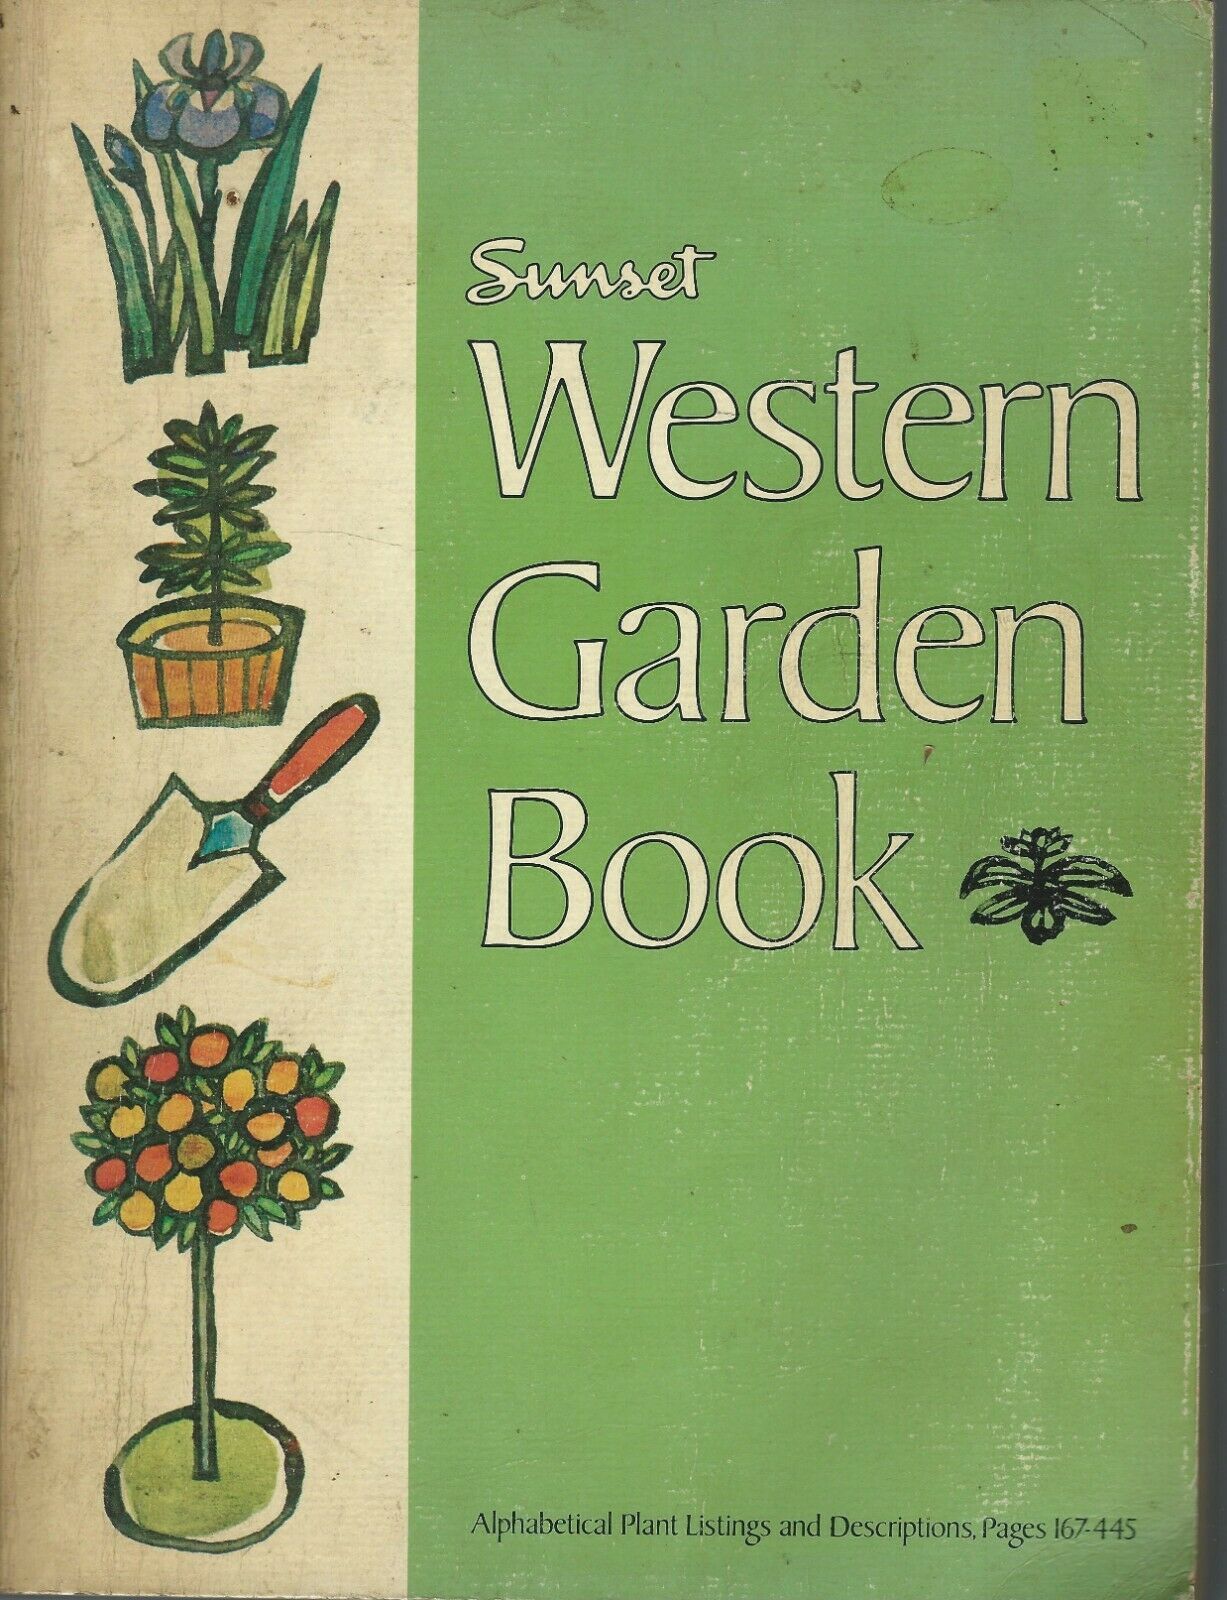 Primary image for Western Garden Book by Sunset Magazine & Books Editors,1976;ALPHA PLANT LISTING